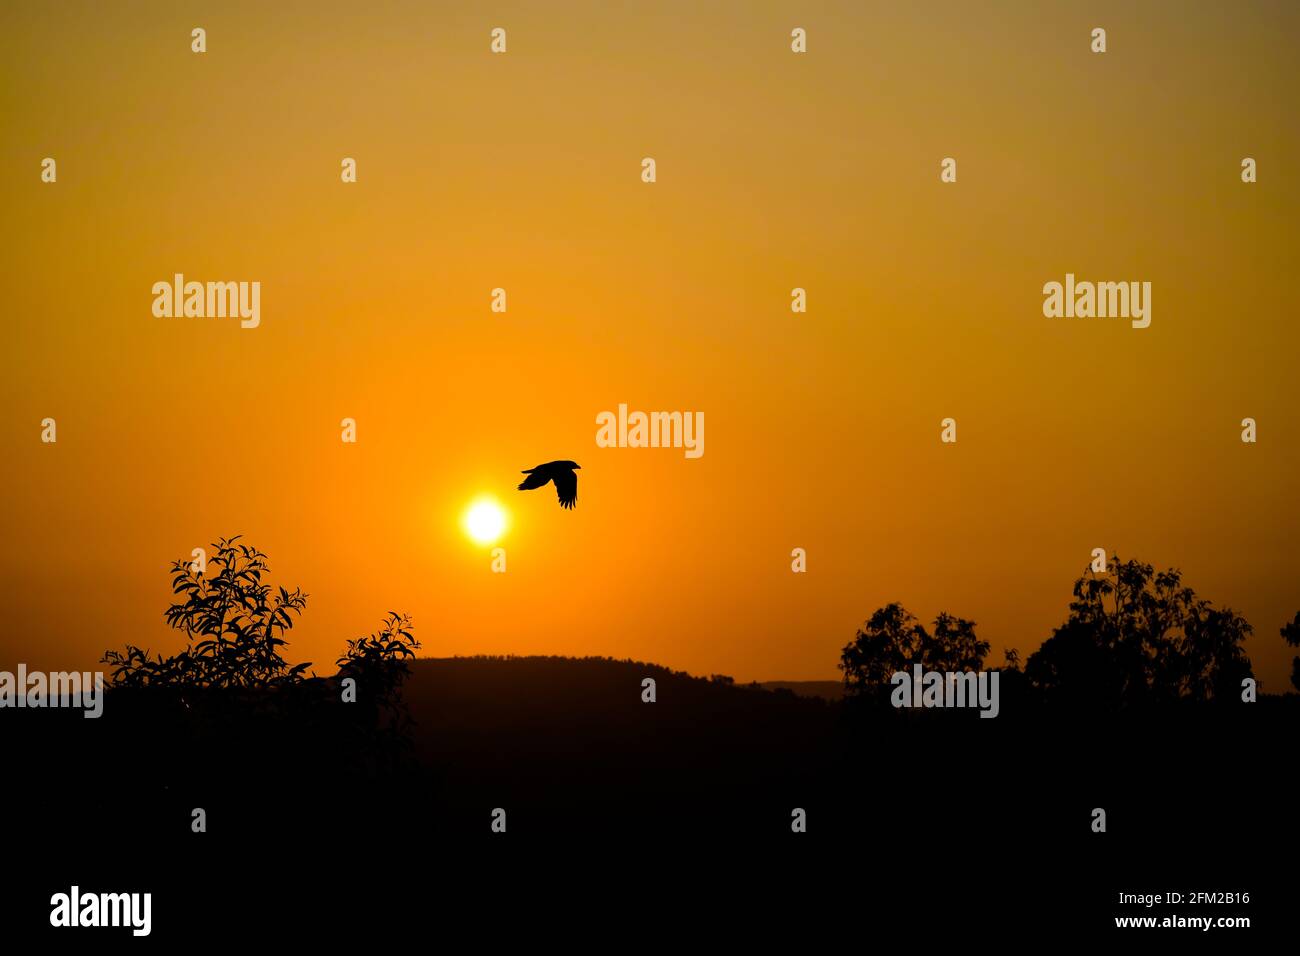 Silhouette of bird flying in the sky during evening time and sun is going down to set at west. Stock Photo